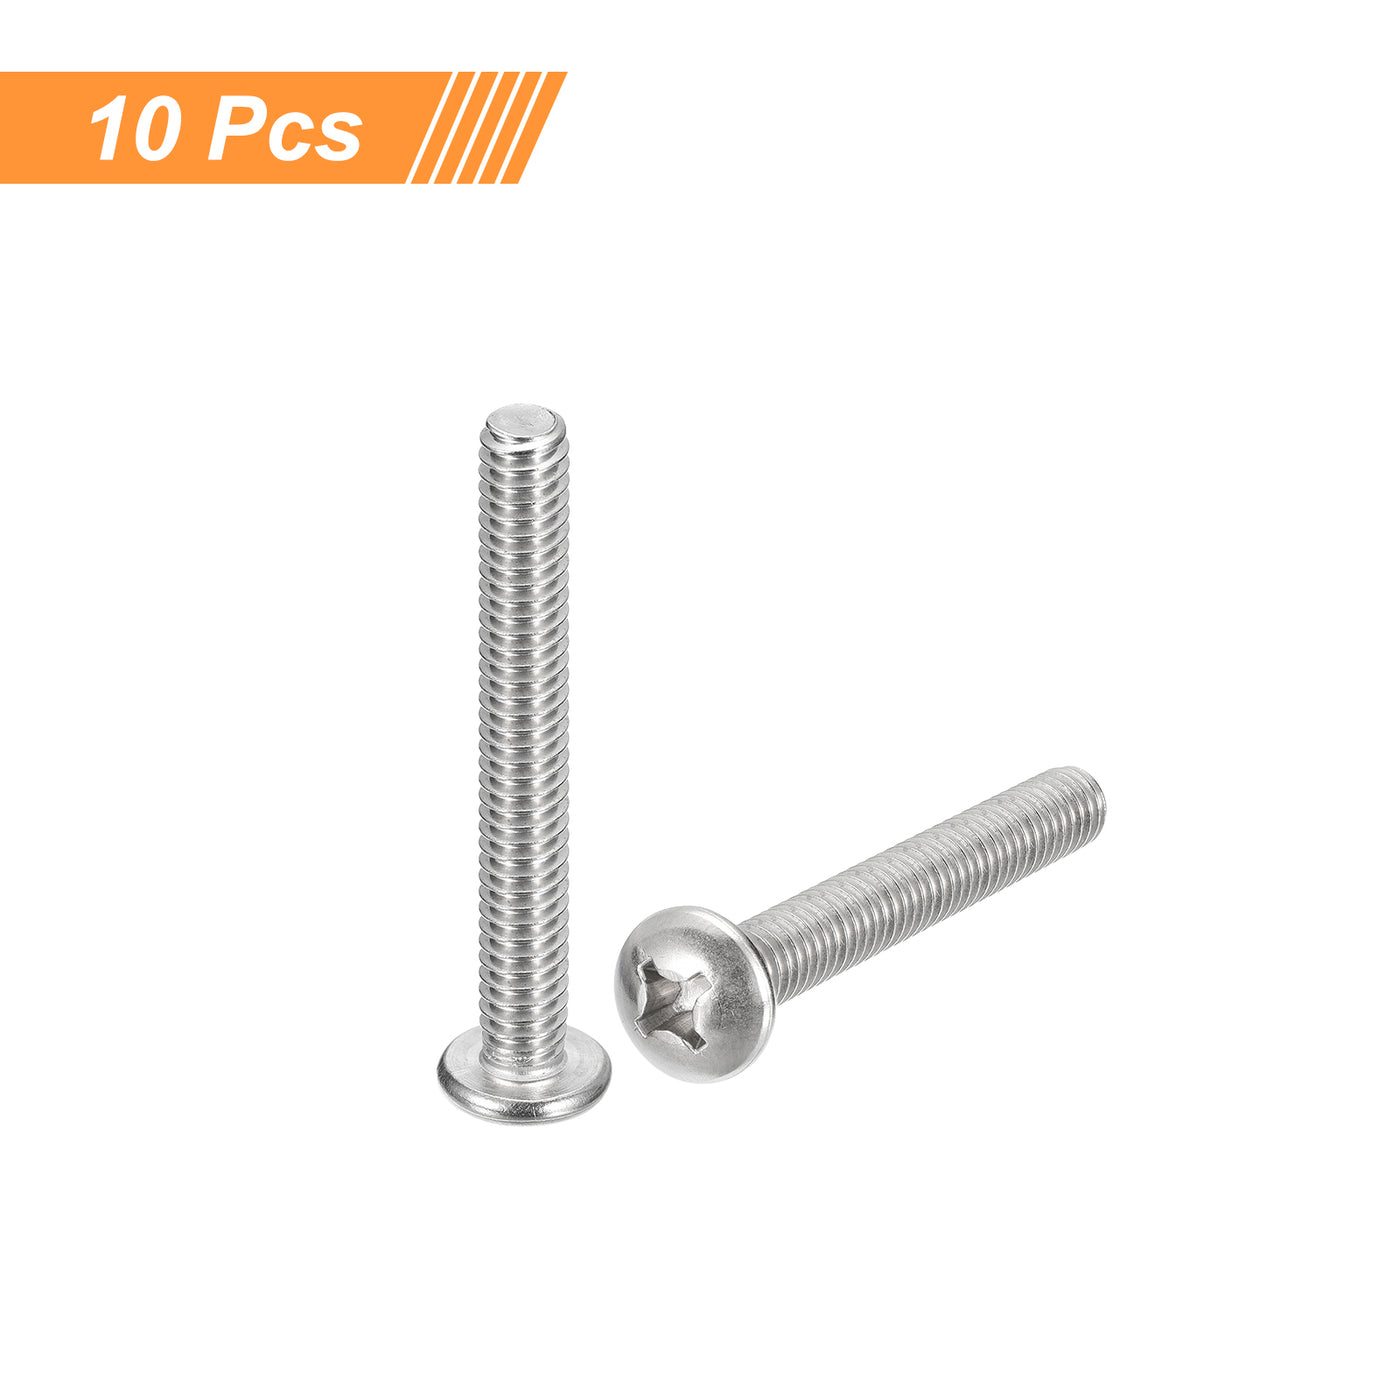 uxcell Uxcell 1/4-20x2" Pan Head Machine Screws, Stainless Steel 18-8 Screw, Pack of 10